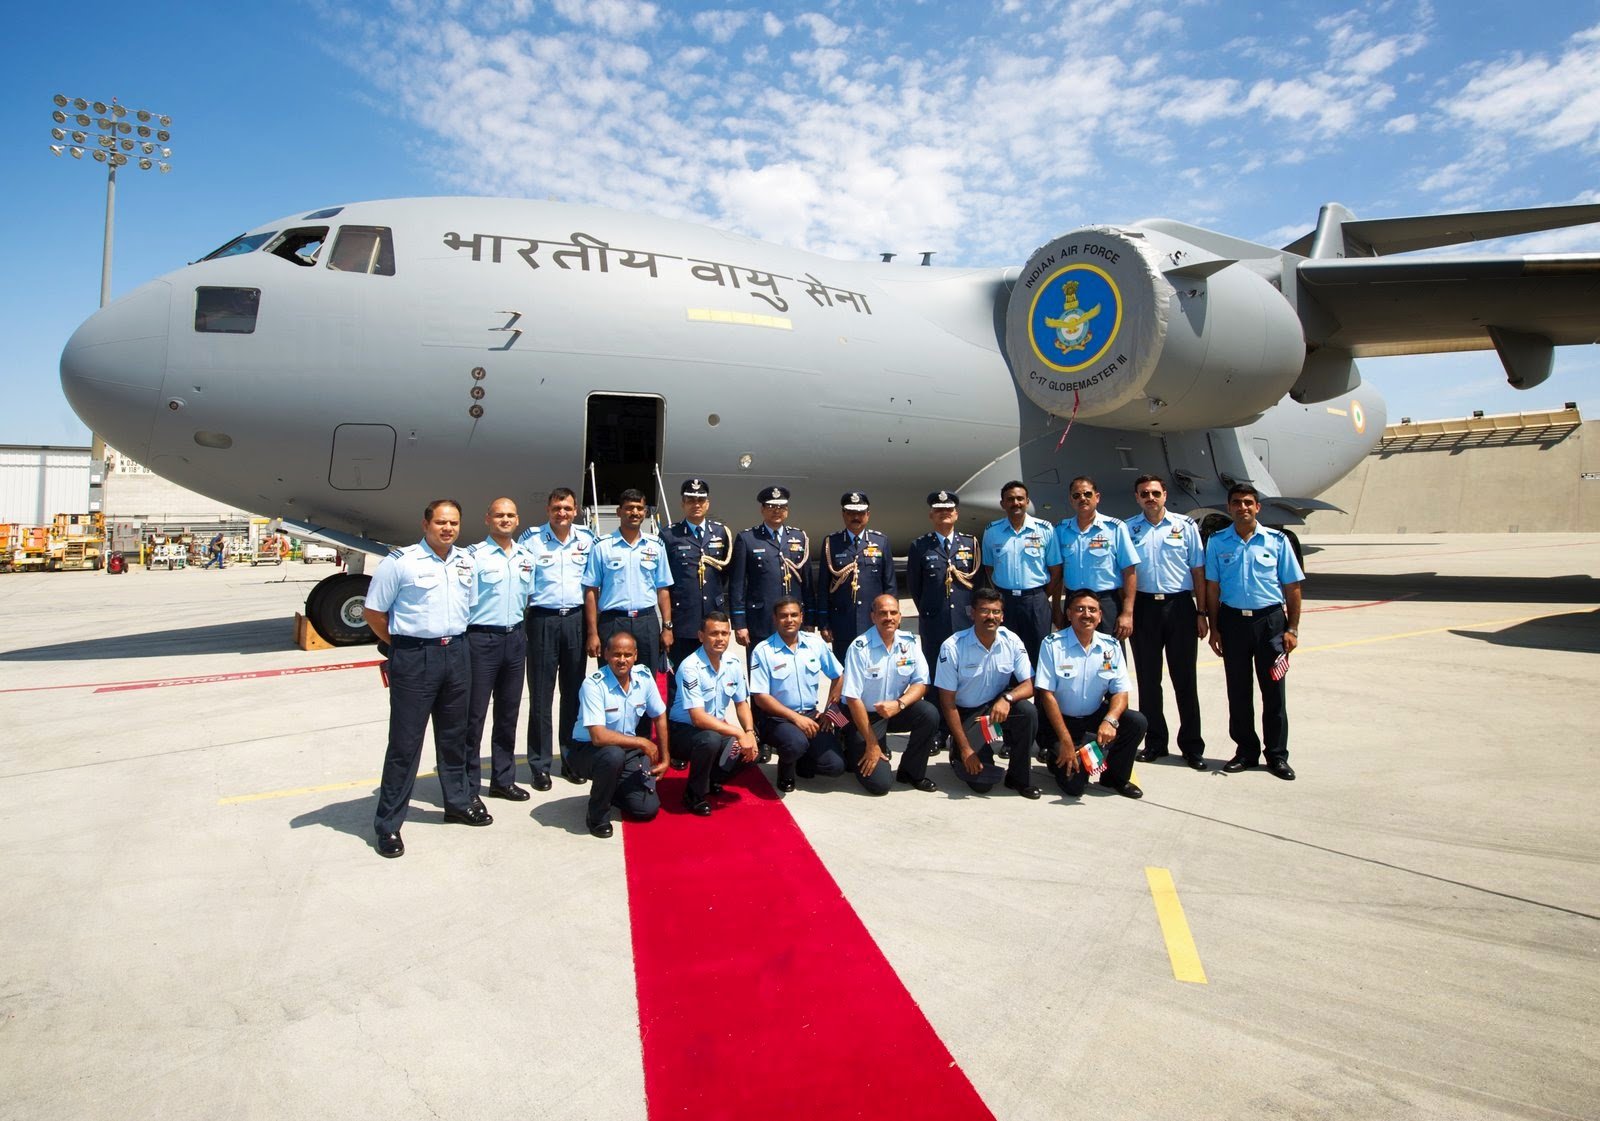 7-interesting-facts-about-indian-air-force-academy